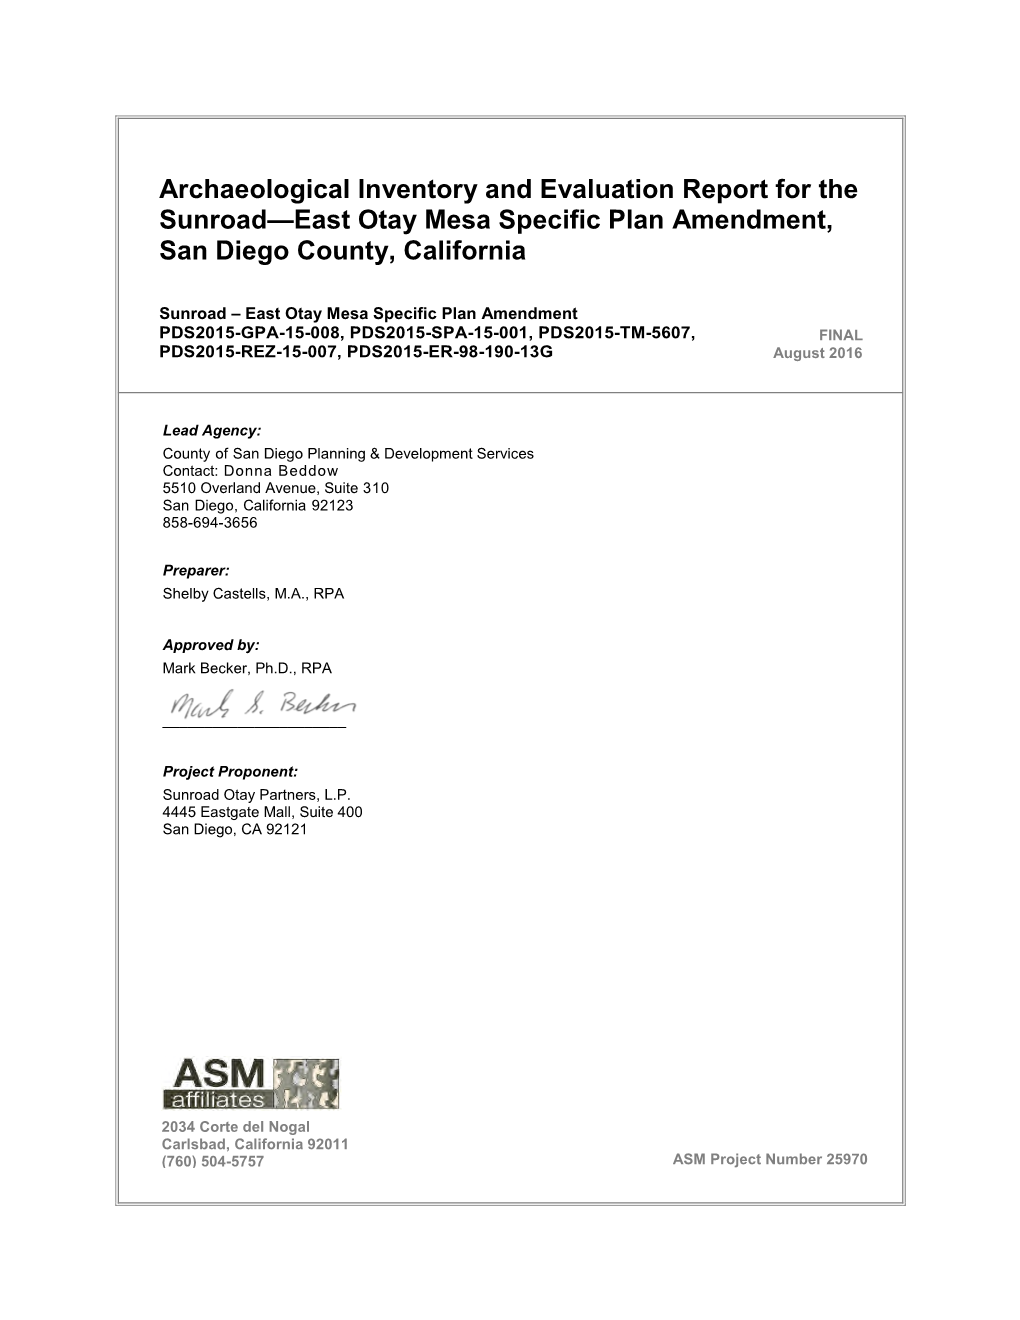 Archaeological Inventory and Evaluation Report for the Sunroad—East Otay Mesa Specific Plan Amendment, San Diego County, California